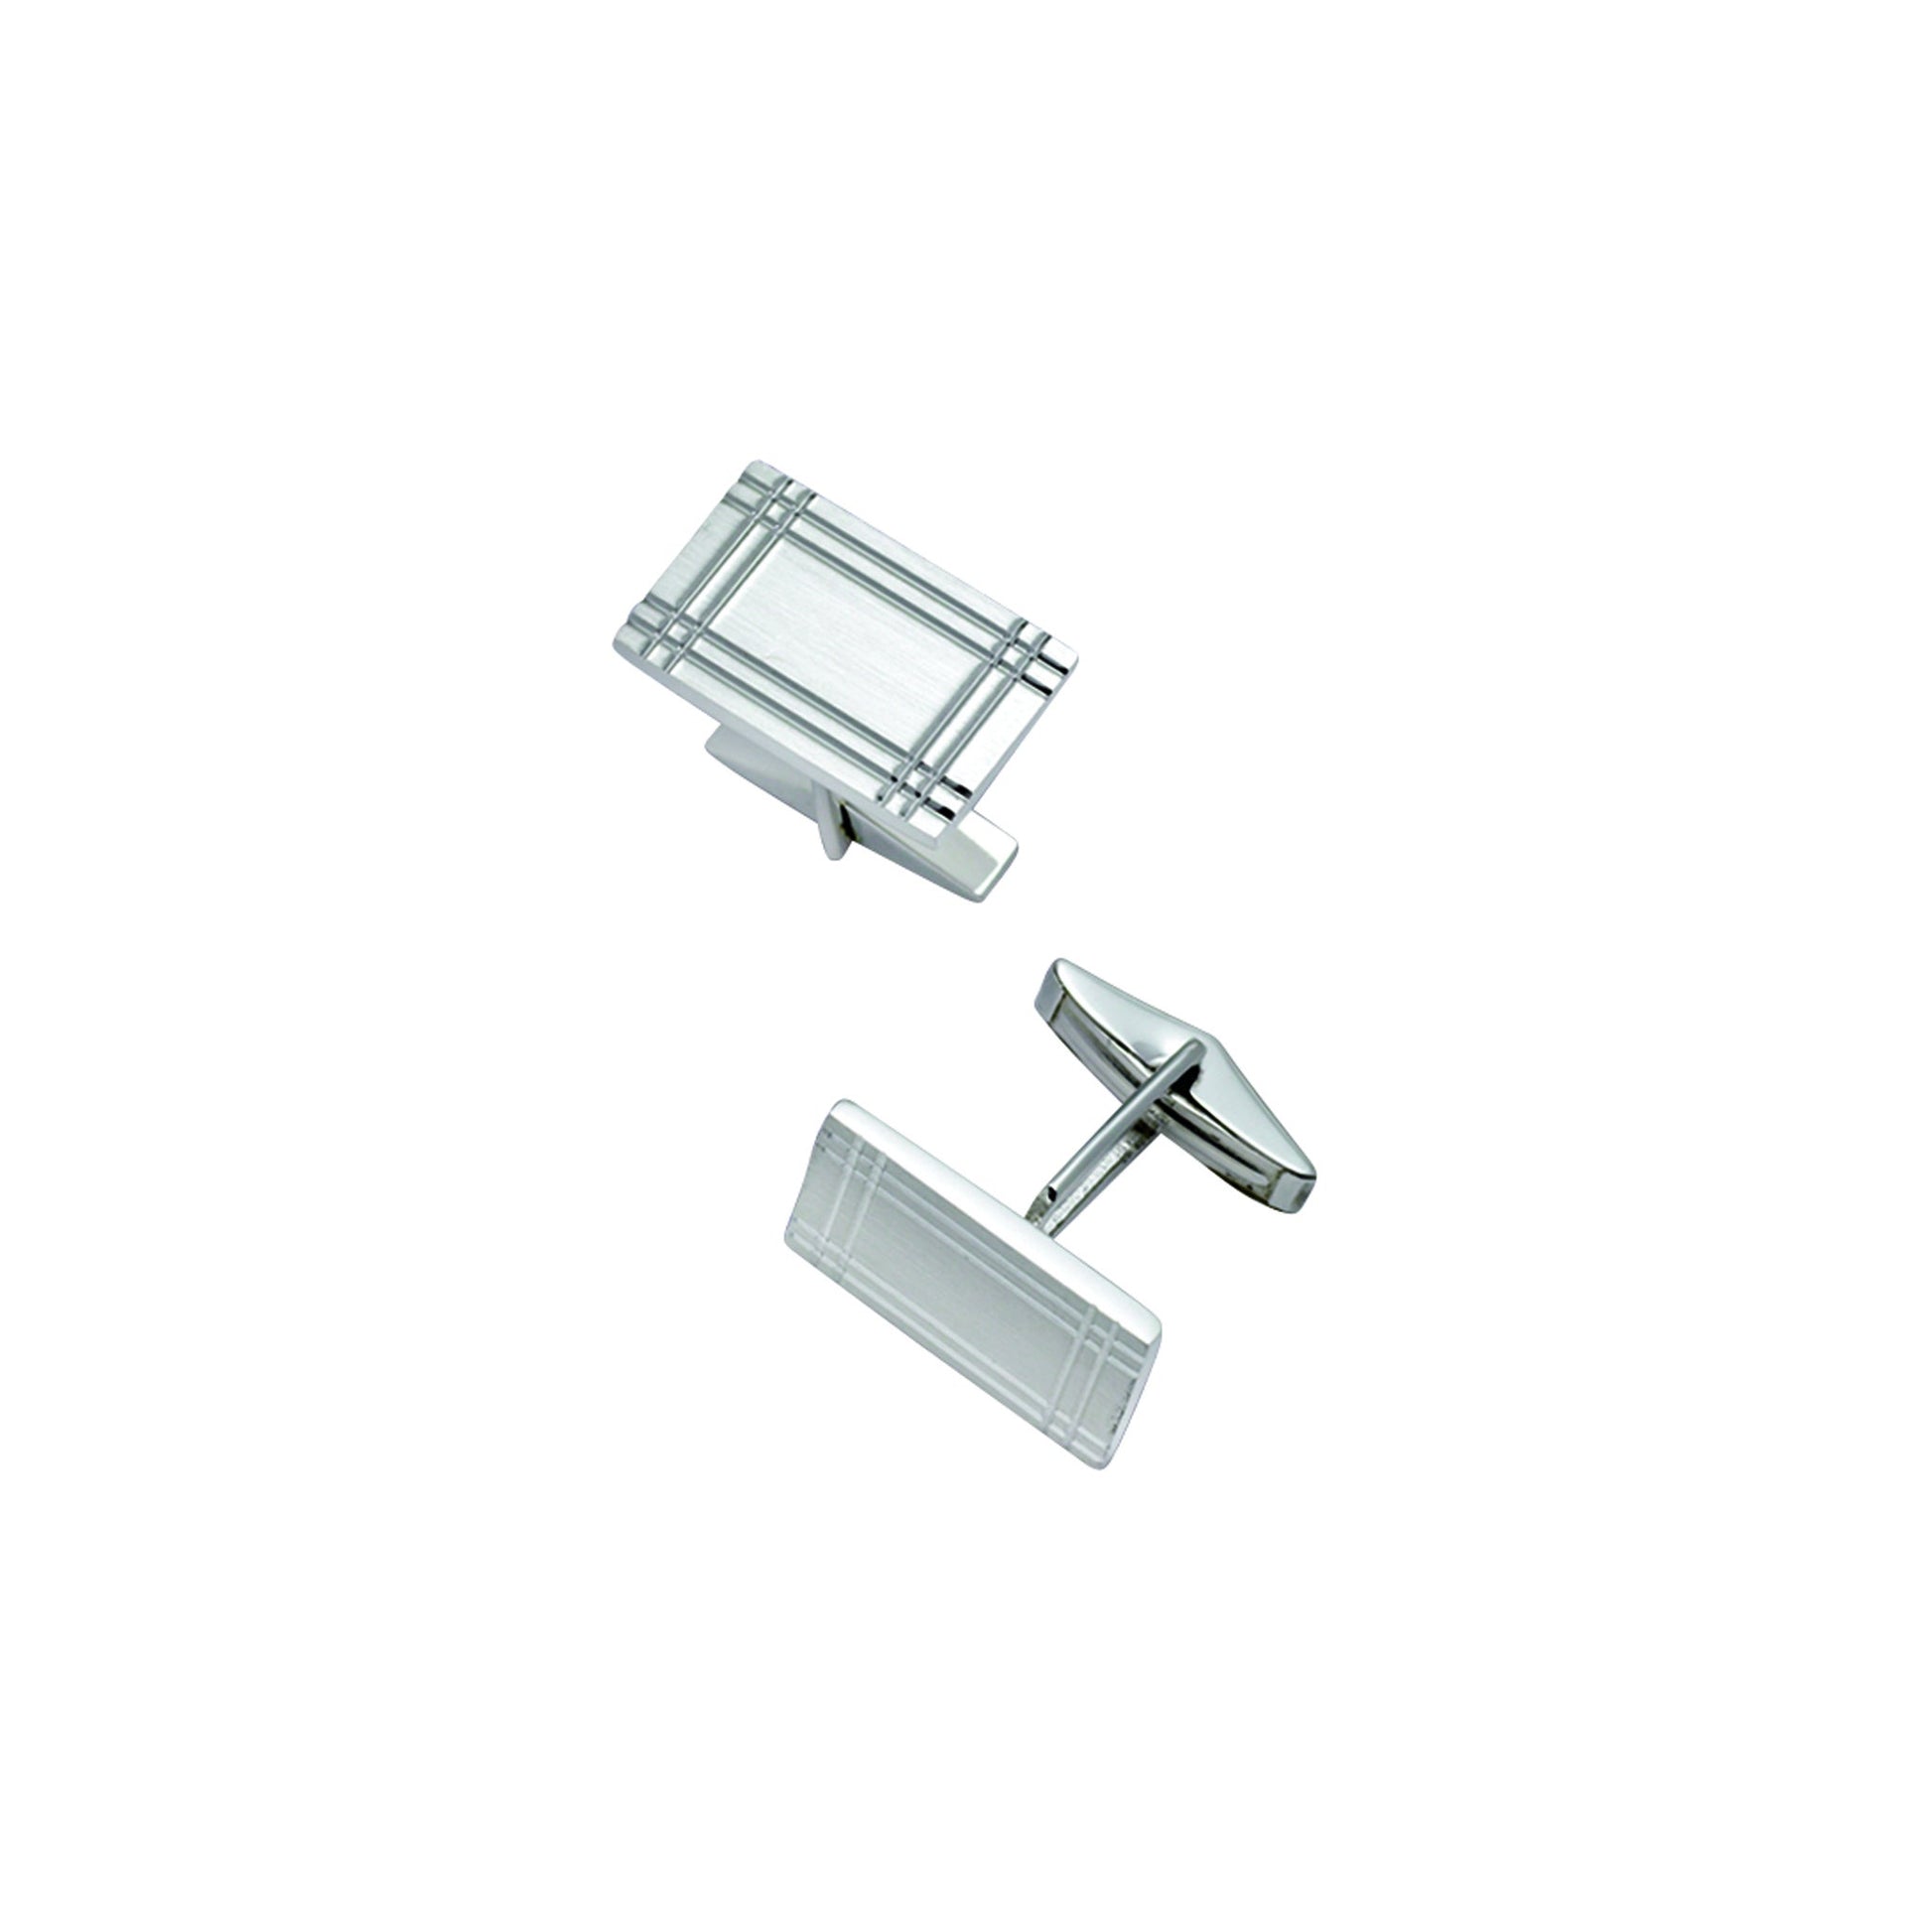 A sterling silver rectangle cufflinks with plaid design displayed on a neutral white background.